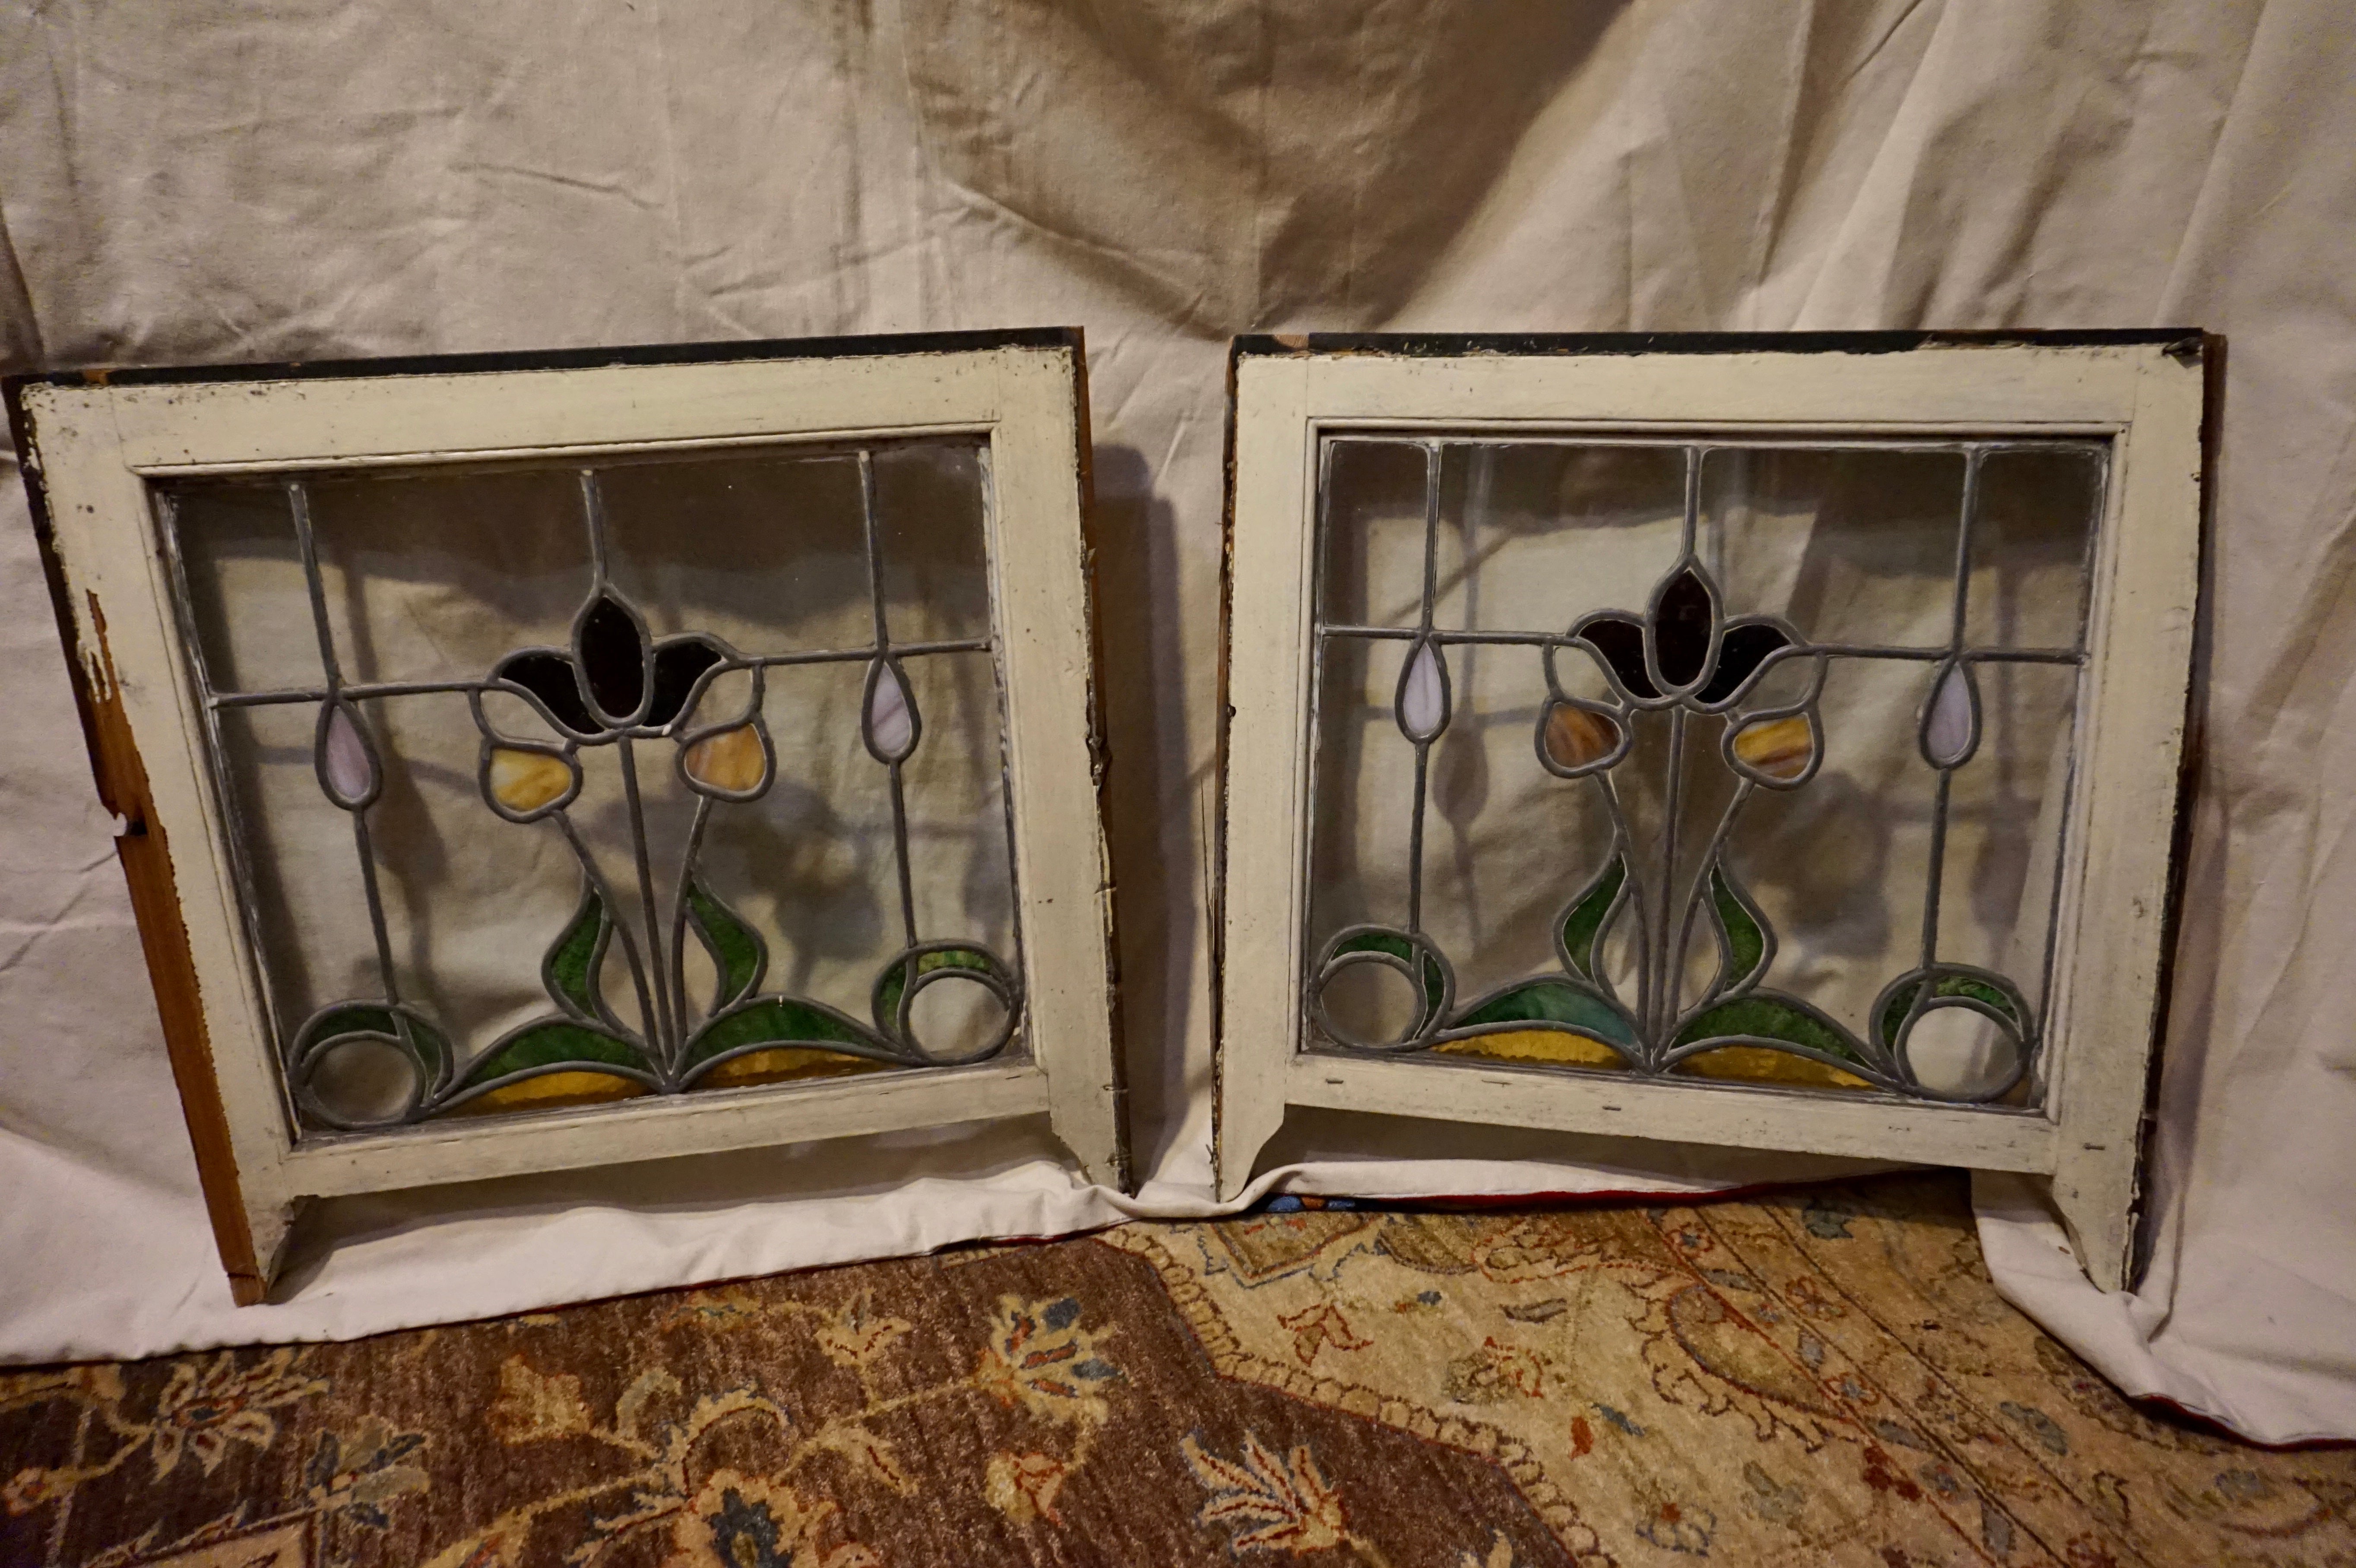 Pair Of Rare Art Nouveau Stain Glass Windows With Scrolling Tulip & Bud Motif For Sale 1